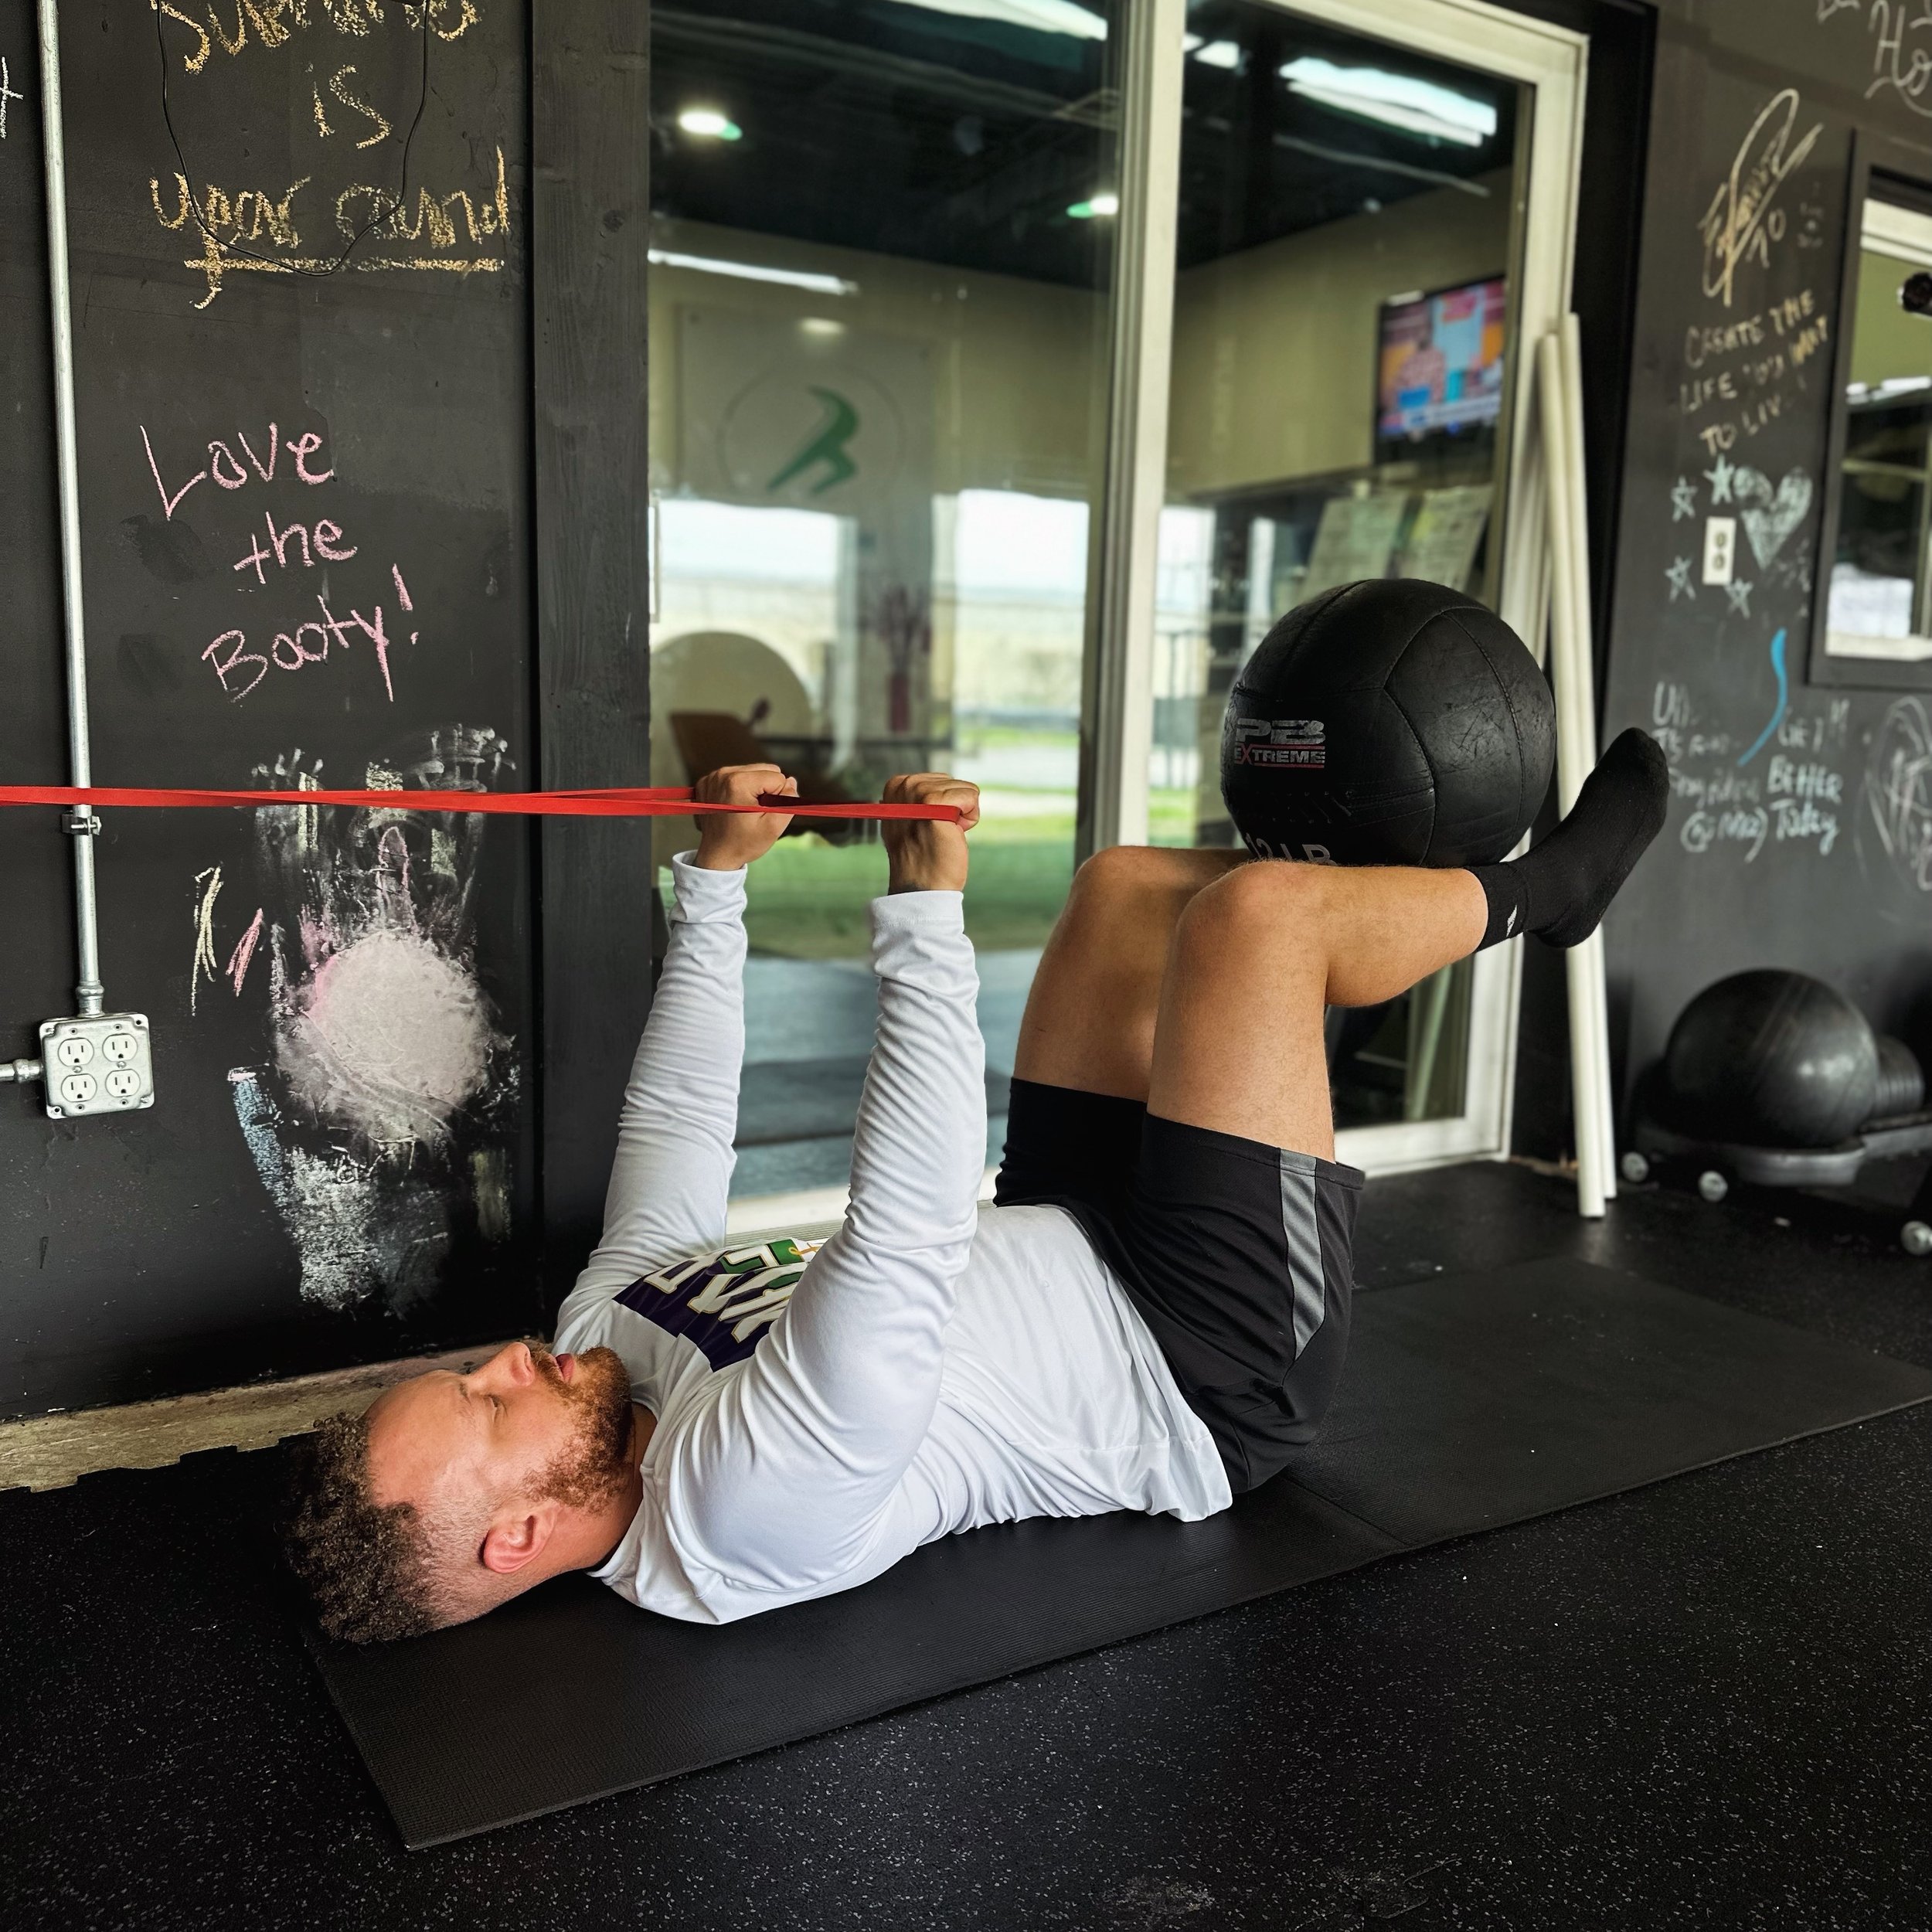 Not Your Average Physical Therapy &mdash; No Cookie Cutter Programs &amp; Same Basic Stretches For Weeks

We craft all of our movement retraining programs specific to each person.. no matter your fitness level &amp; individual goals &mdash; you can t